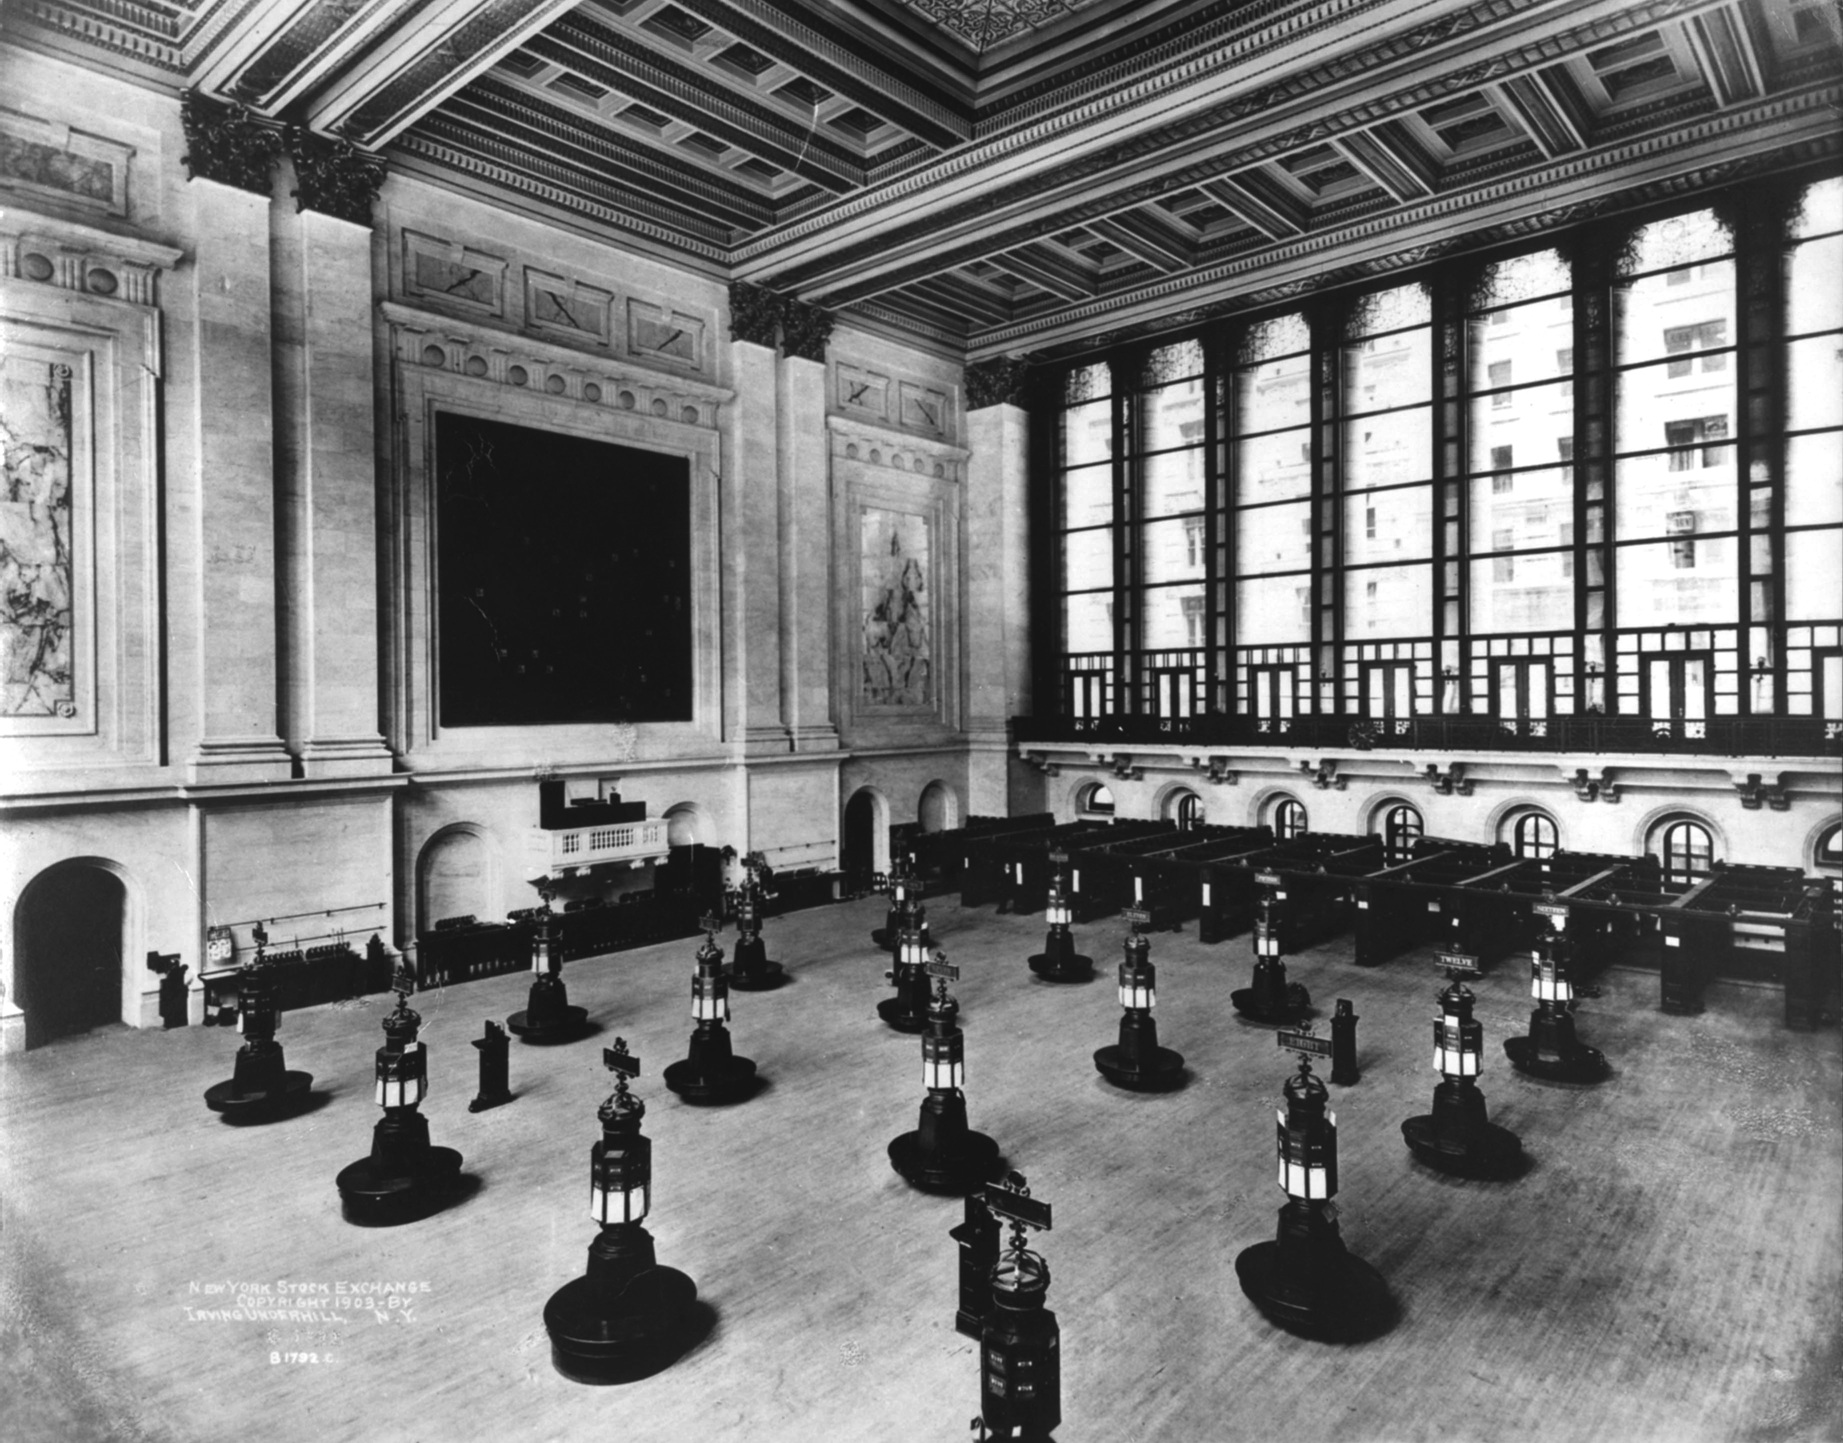 NYSE trading floor in 1903